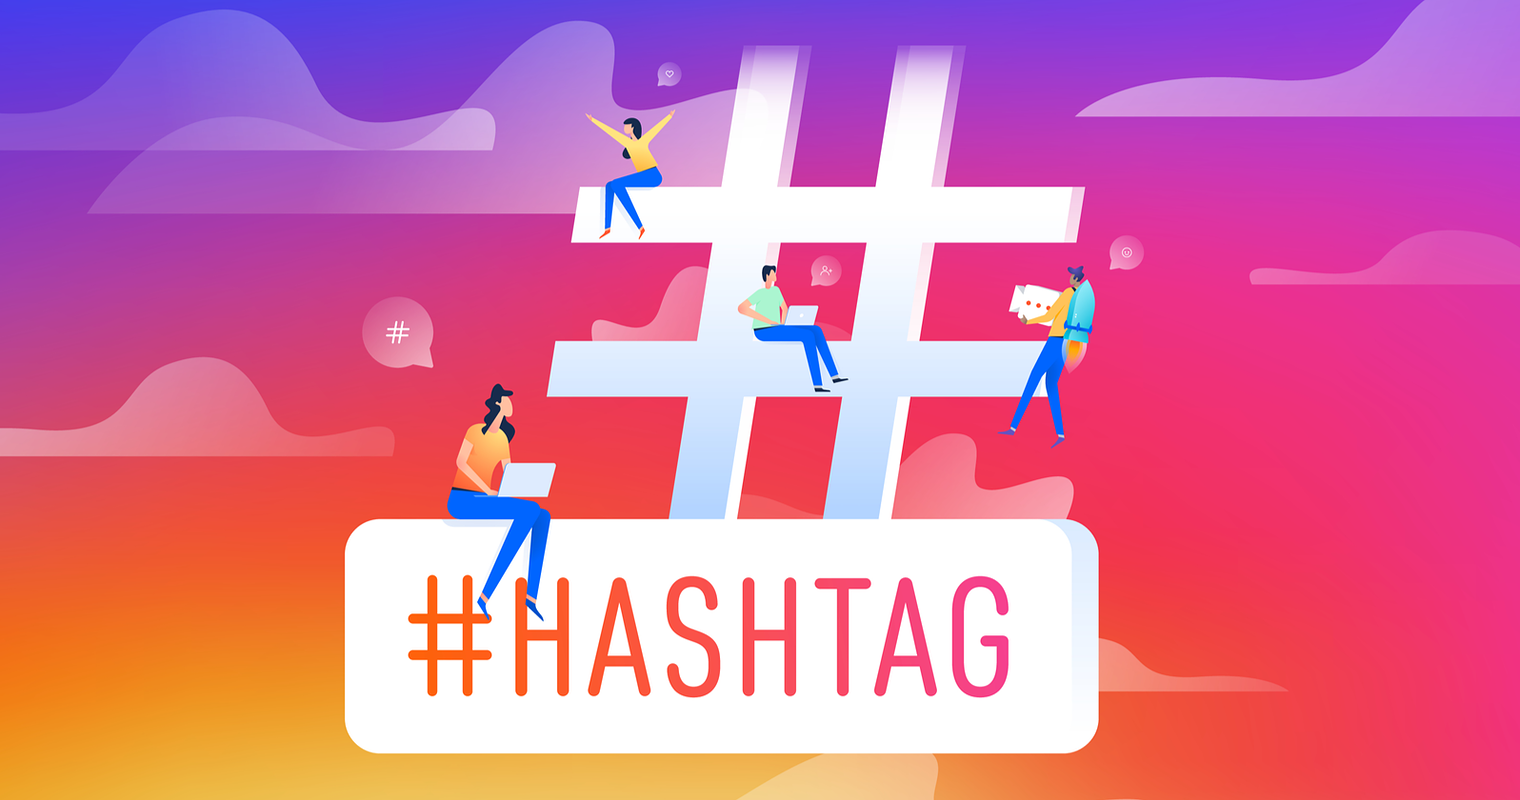 use relevant keywords and hashtags. 